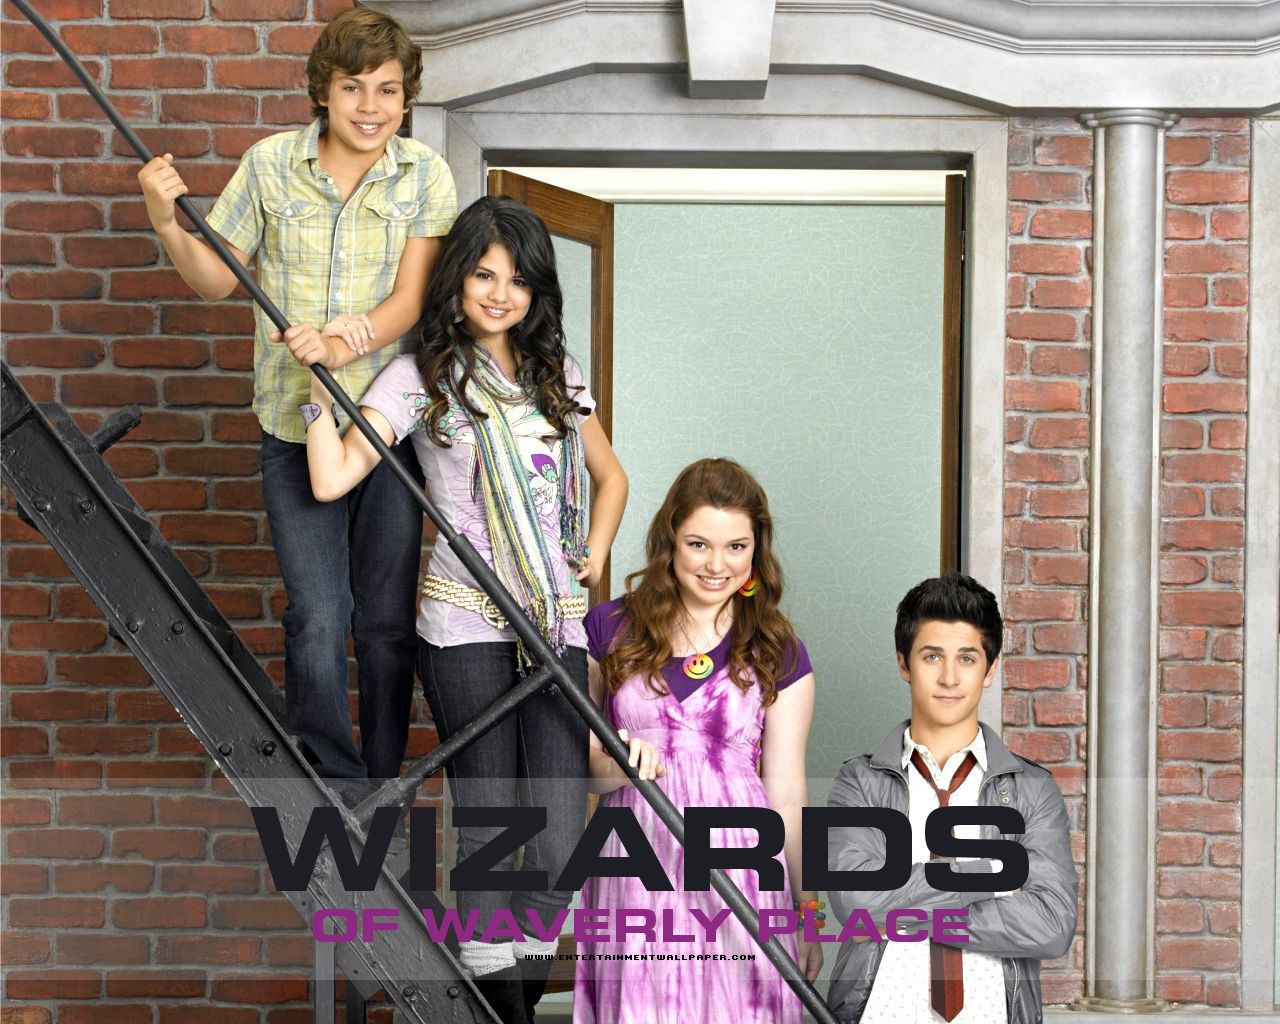 Wizards of Waverly Place Tapete #7 - 1280x1024